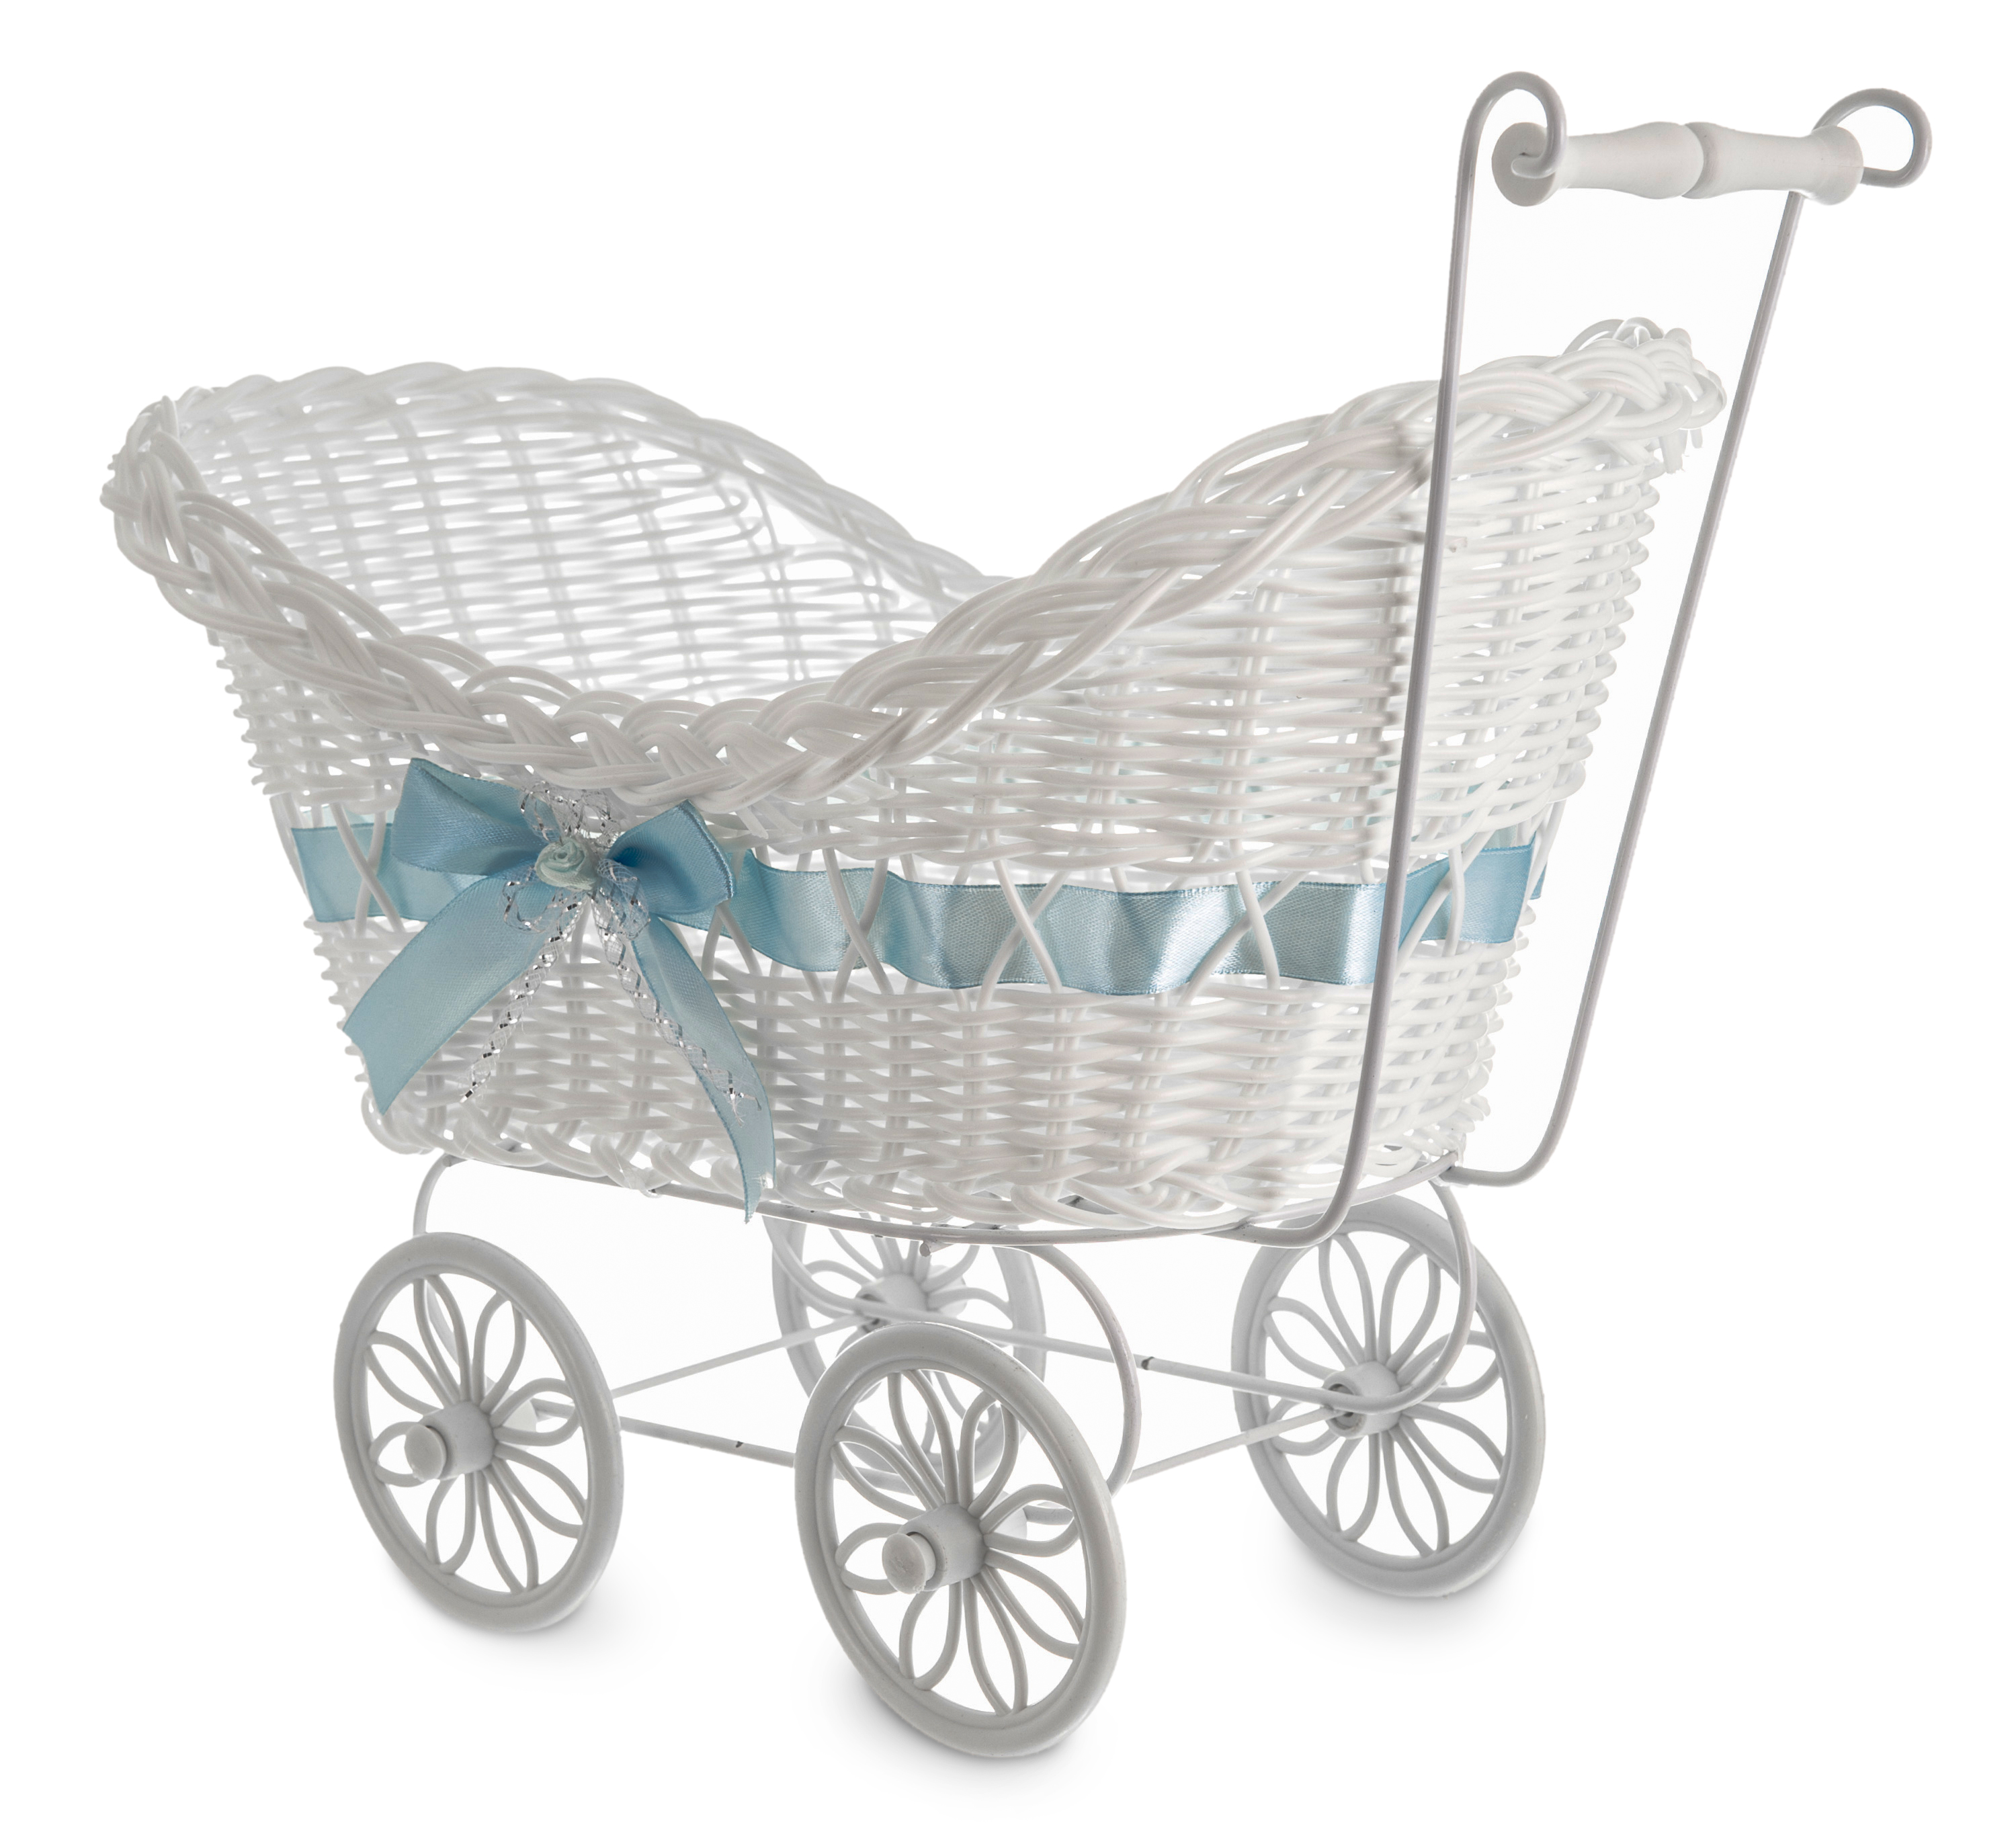 Blue LIVIVO White Baby Pram Wicker Hamper Basket with Handles Wheels and Colourful Satin Ribbon Bow Perfect for Baby Showers or Newborn Baby Gifts 